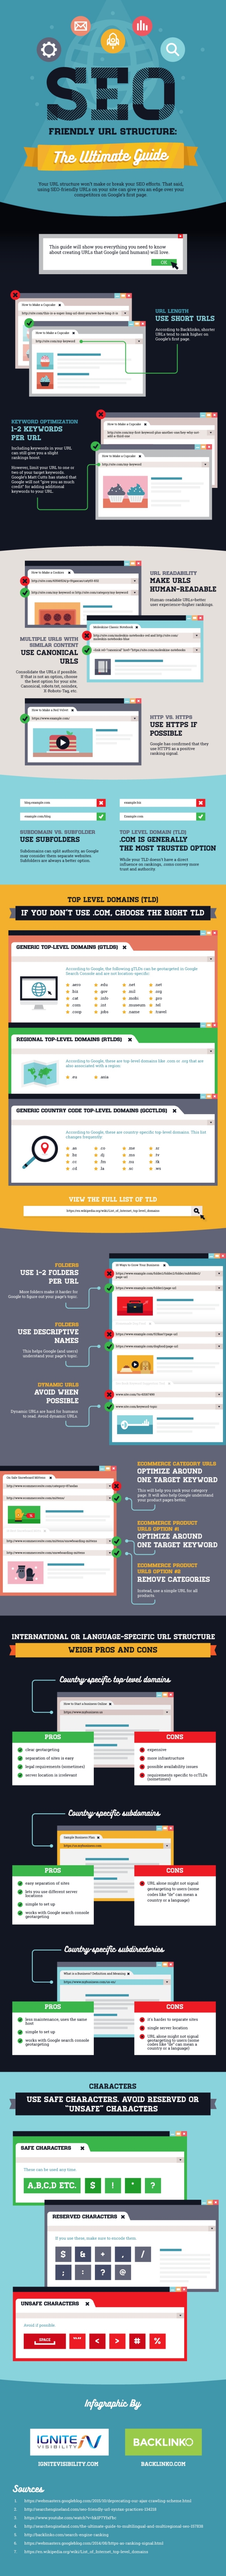 Infographic displaying URL structure tips for SEO success